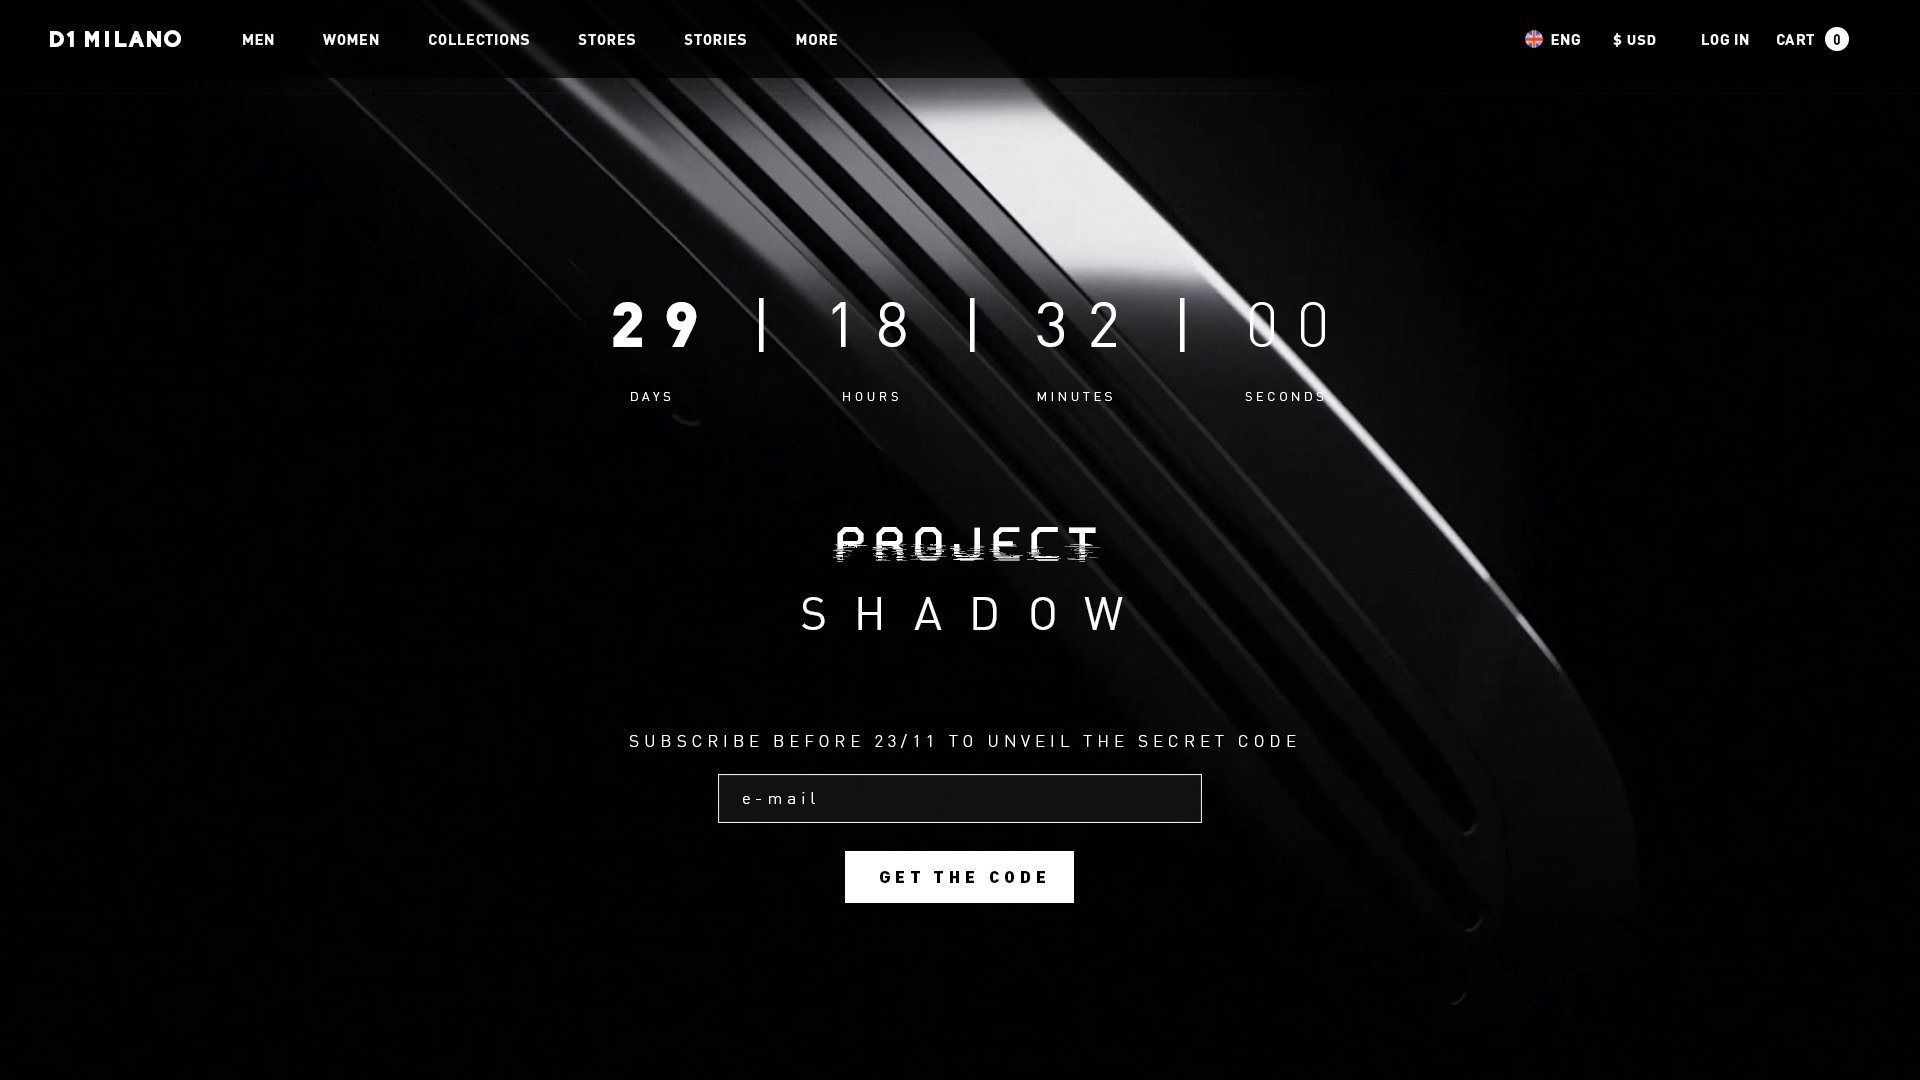 Limited edition "Project Shadow" page